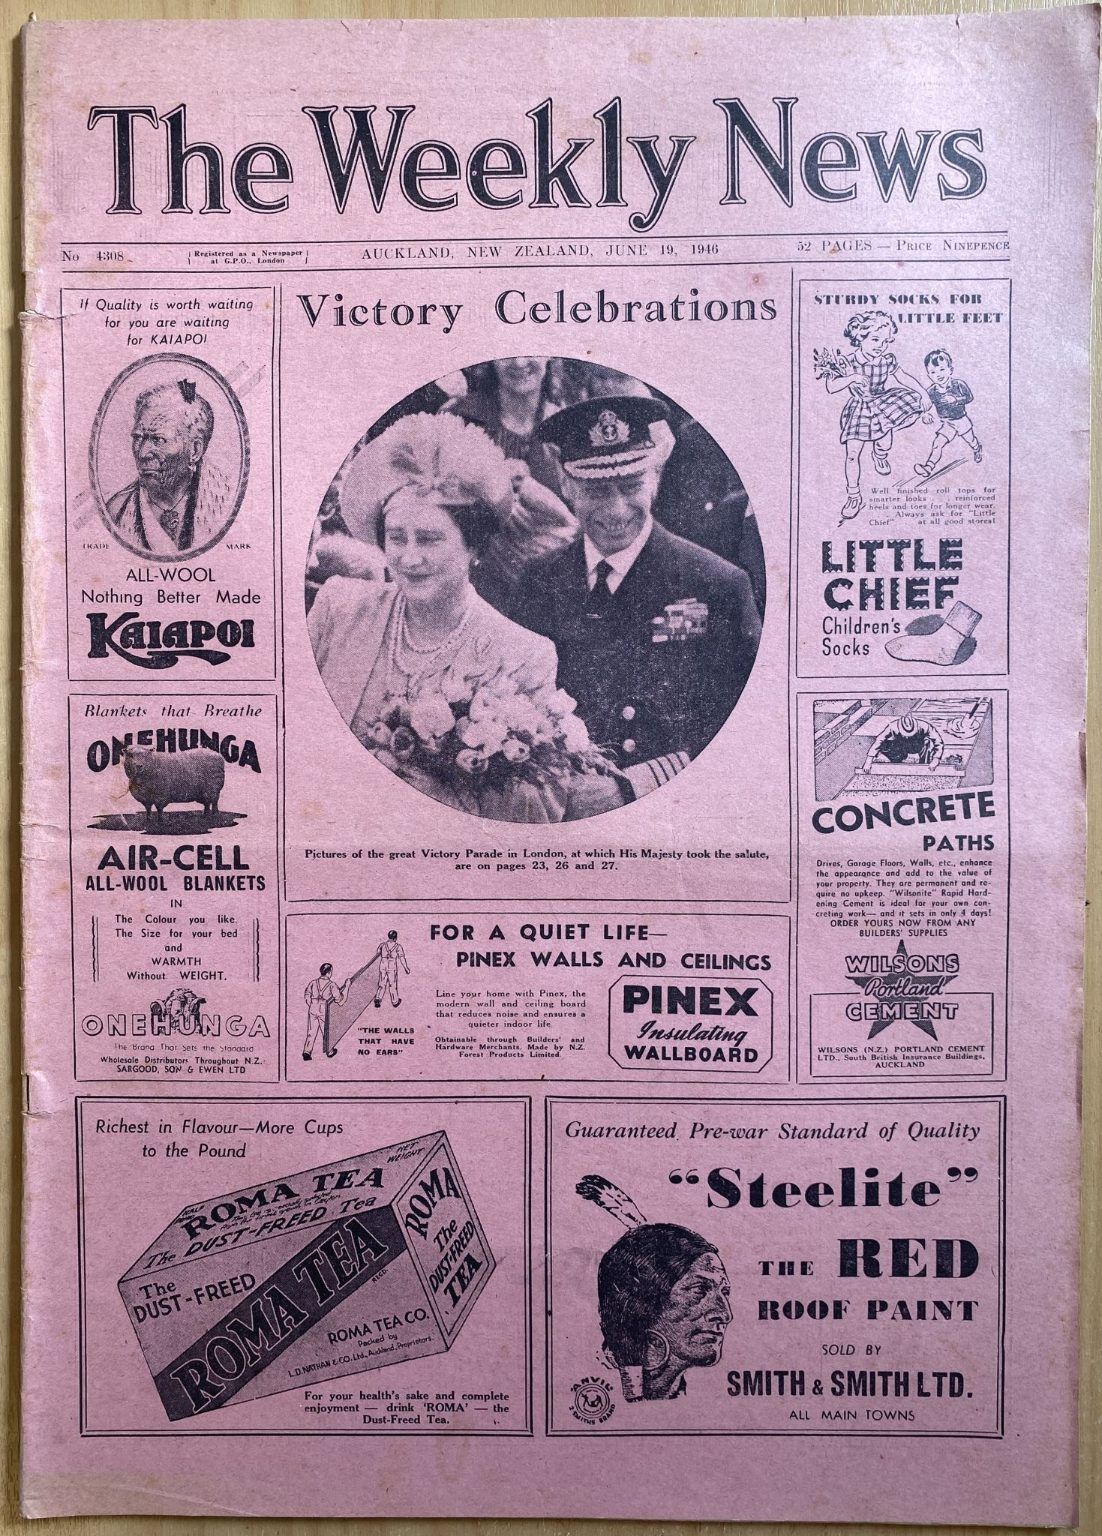 OLD NEWSPAPER: The Weekly News - No. 4308, 19 June 1946